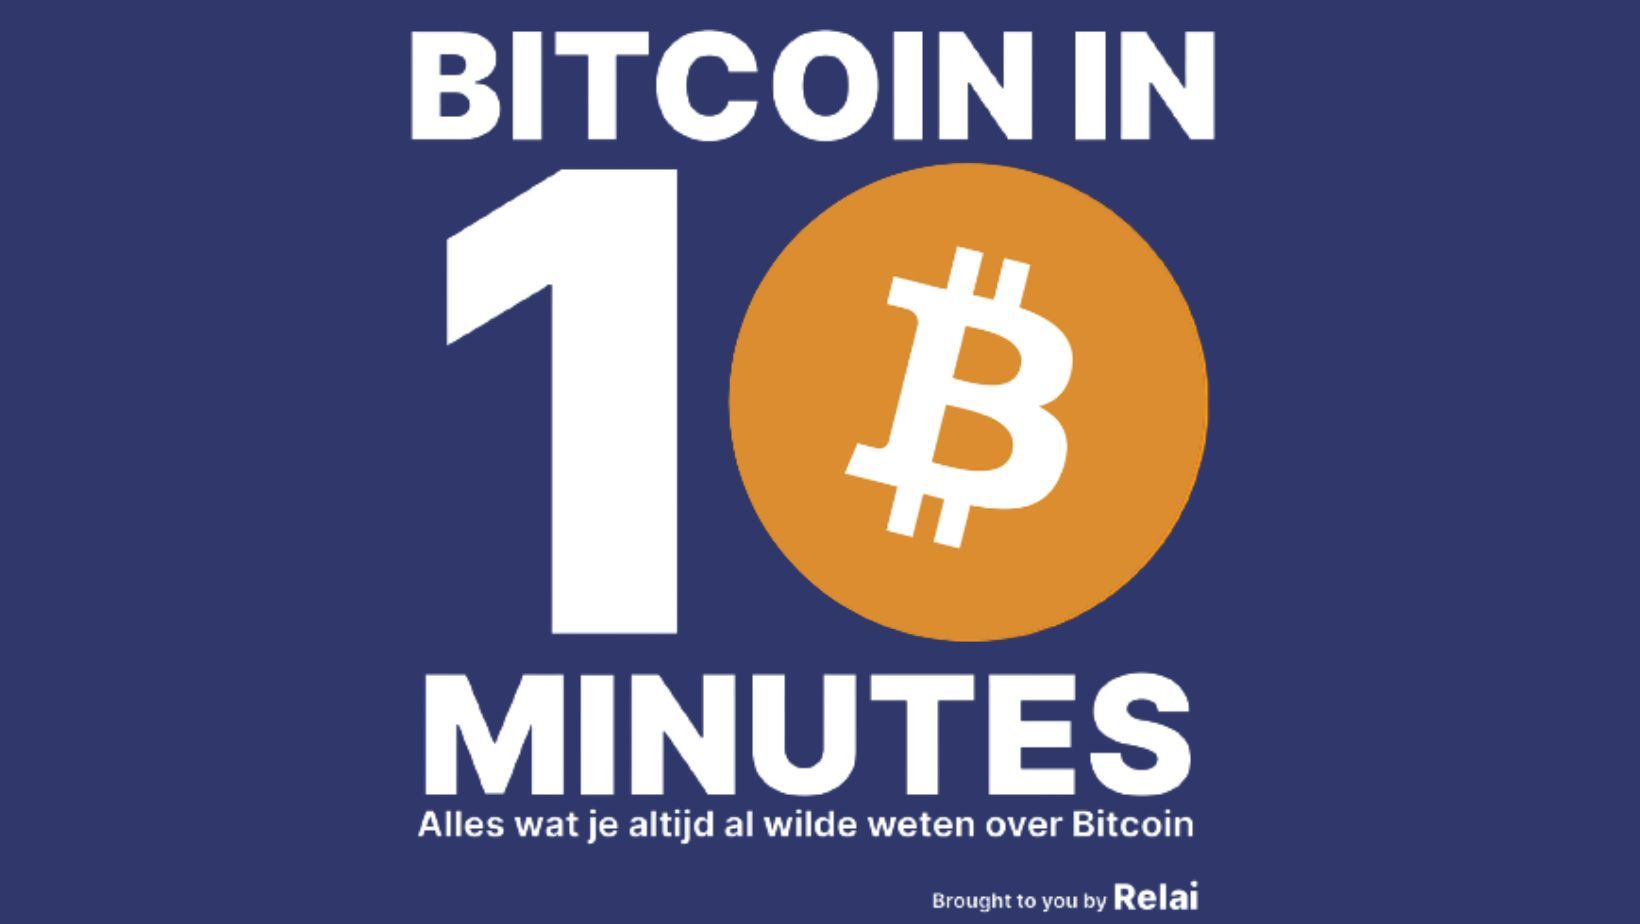 Bitcoin in 10 Minutes